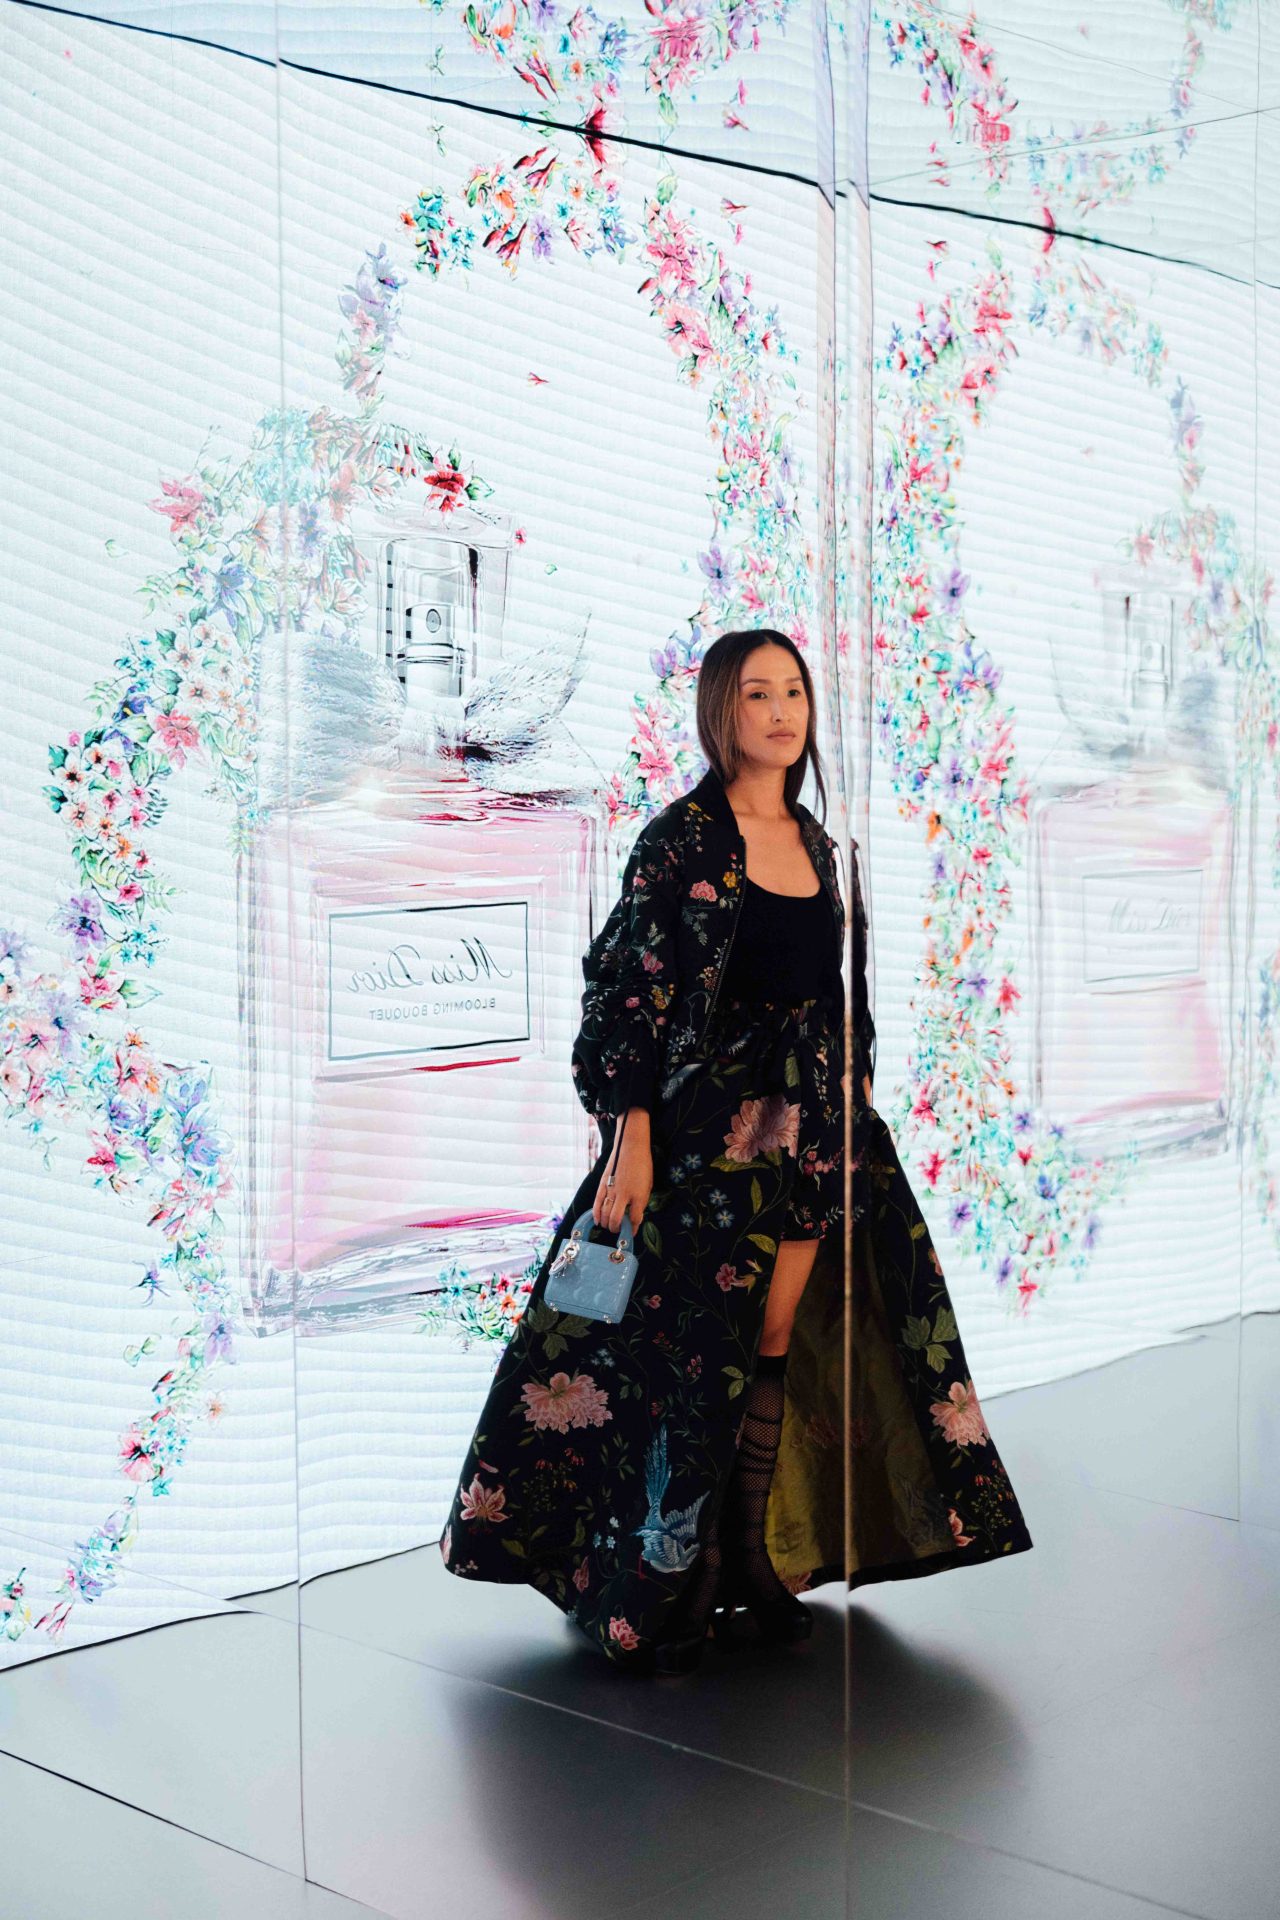 Dior Beauty Fêtes Its New L.A. Pop-Up With a Star-Studded Party